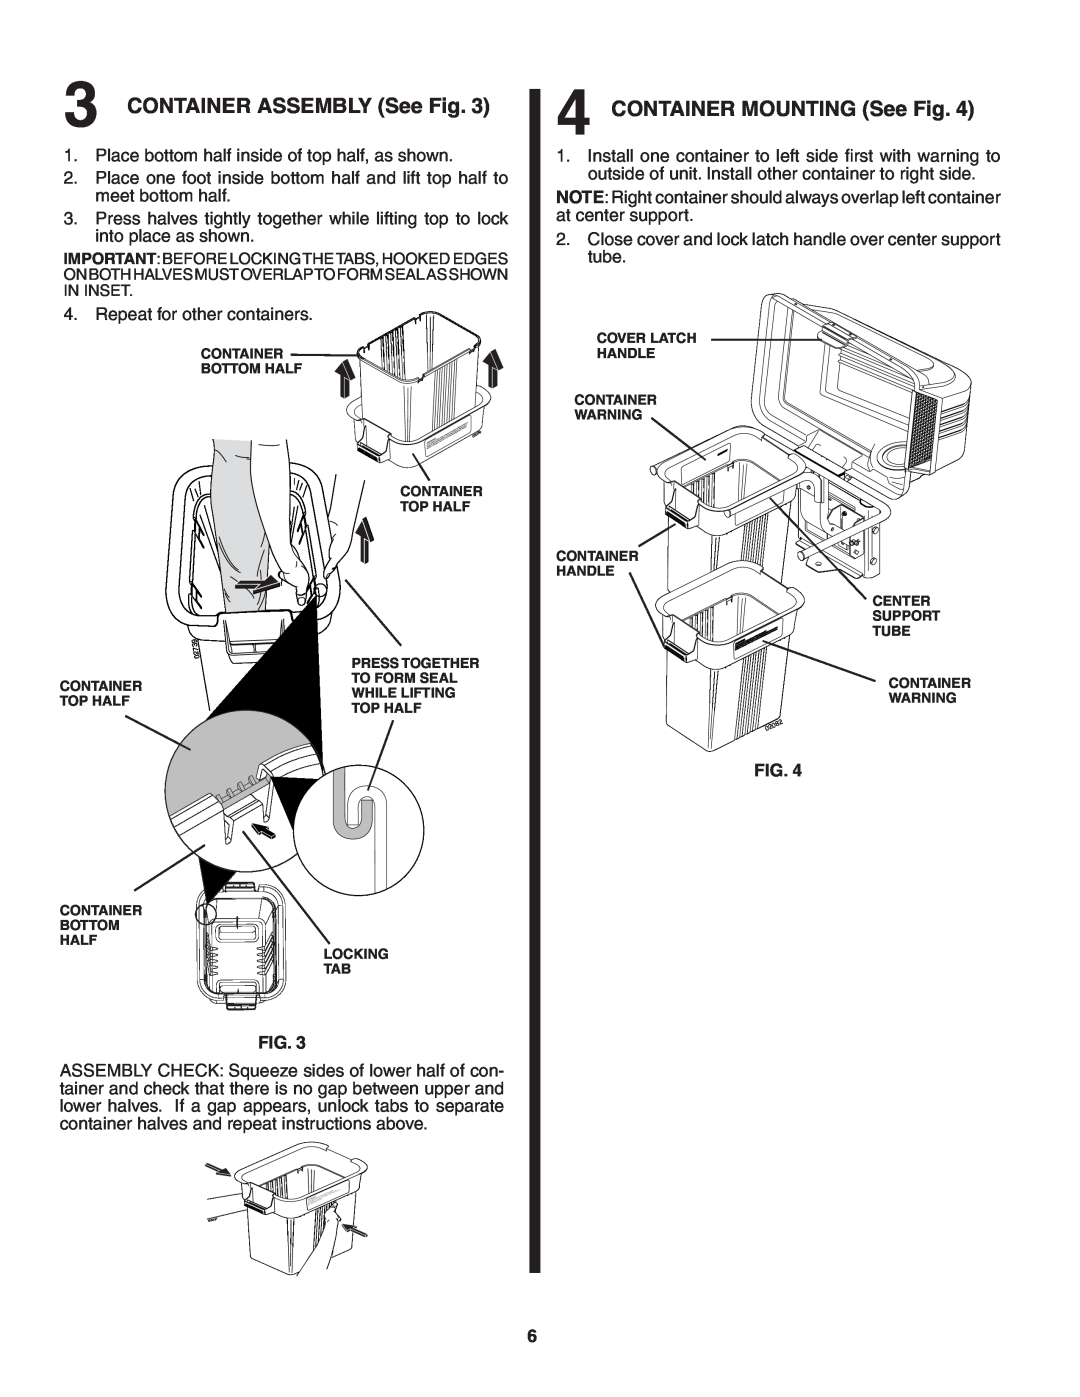 Poulan QCT42, 402338, 960 72 00-06 owner manual CONTAINER ASSEMBLY See Fig, CONTAINER MOUNTING See Fig 